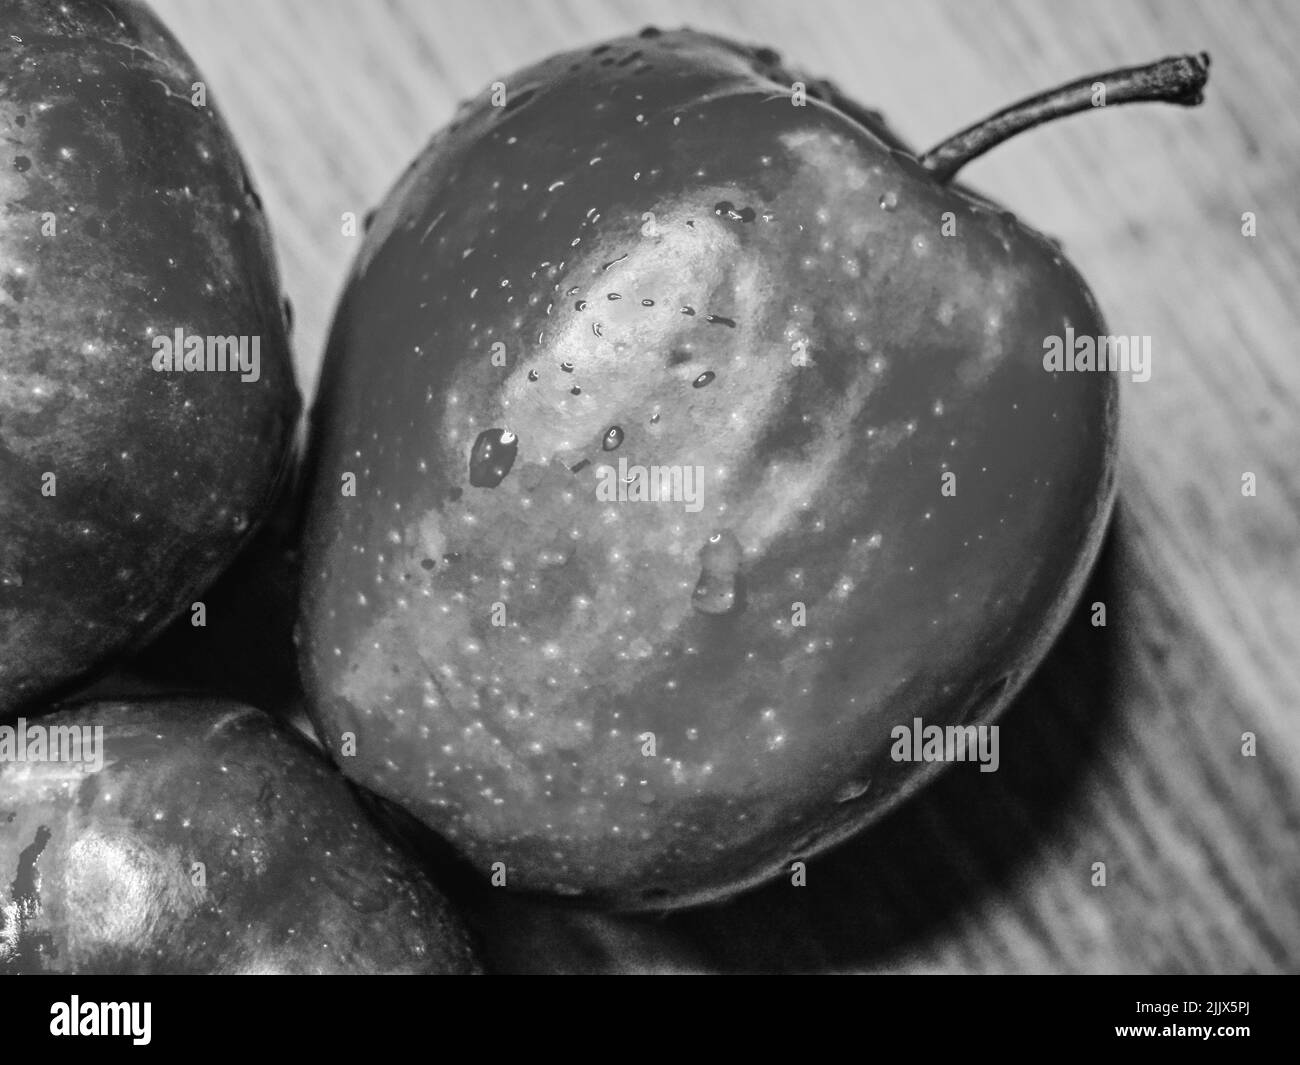 A large apple of the Red Chief variety. Black and white image. Stock Photo